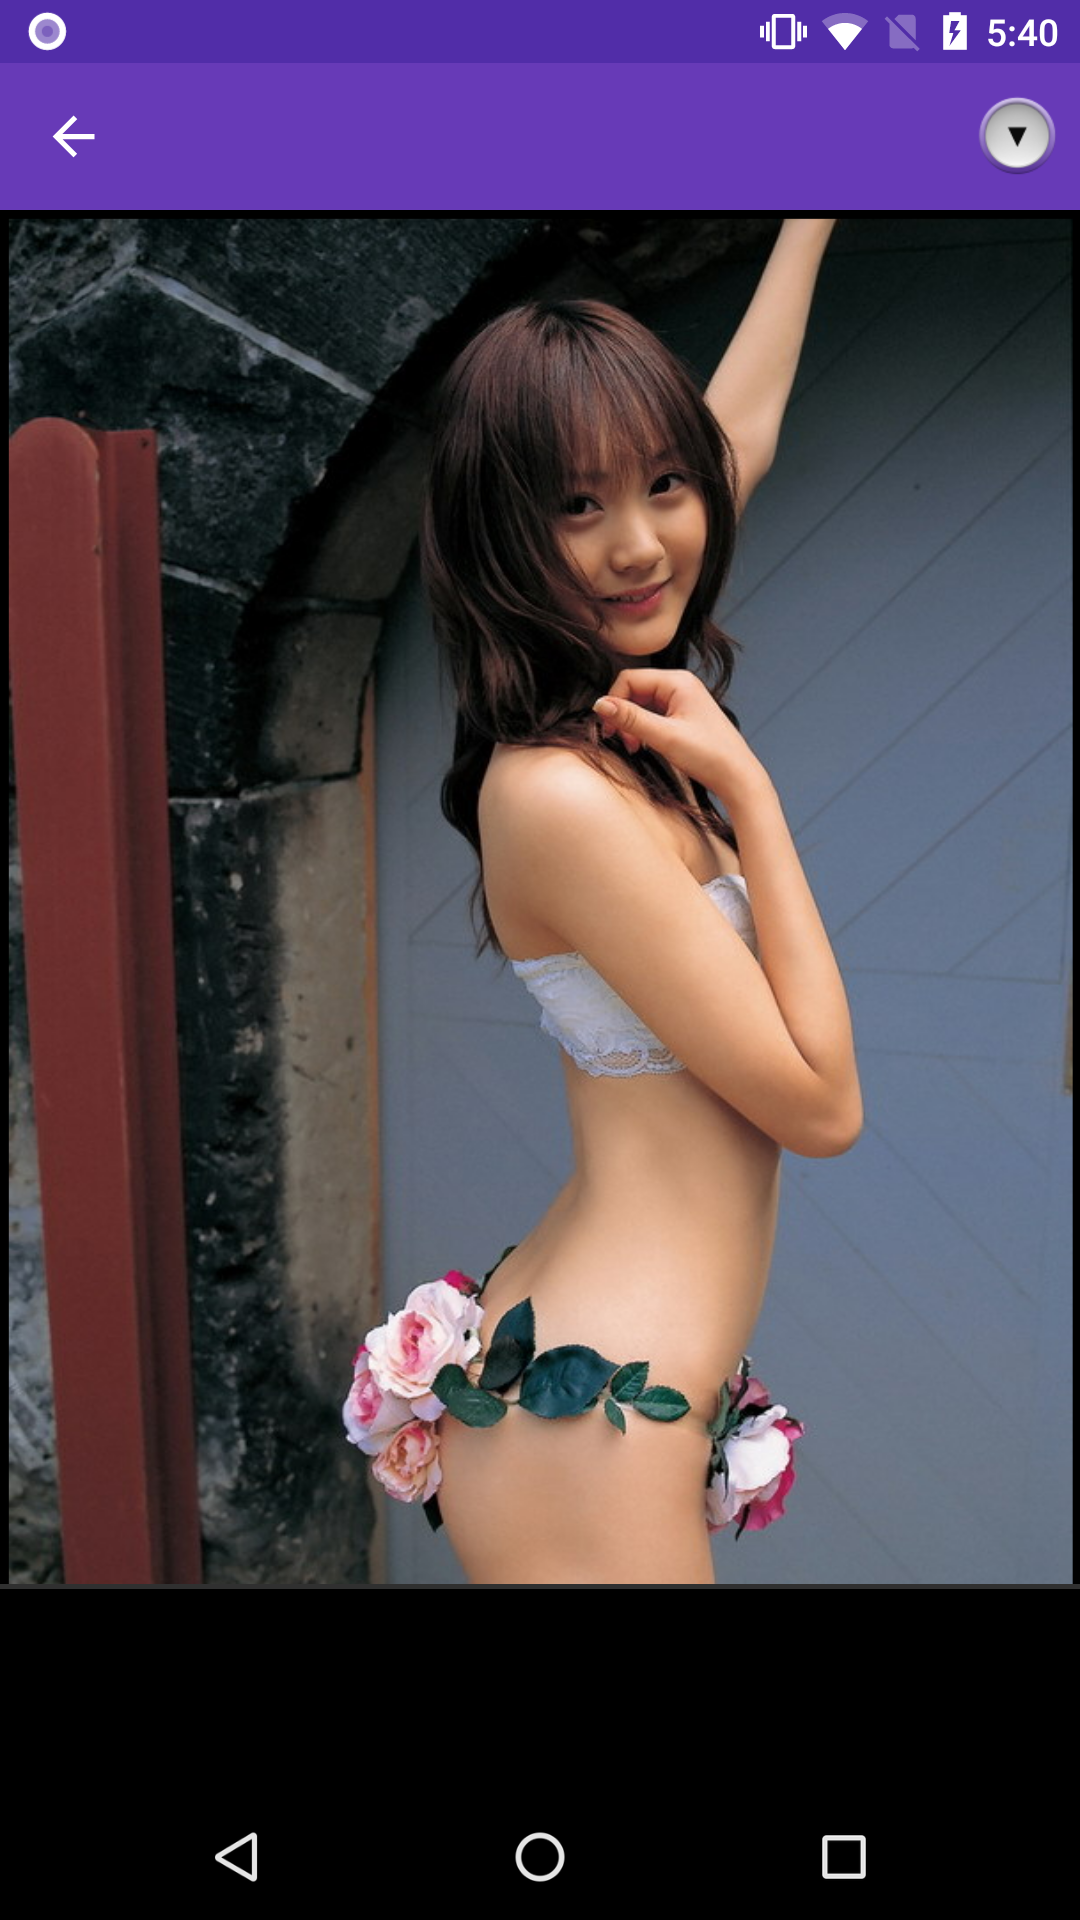 Sexy Asian Girls japan,korean,girls,porn,image,app,download,asian,wallpaper,picture,china,henti,sex,sexy,pics,hentia,amateur,hentei,photos,hentai,apps,galleries